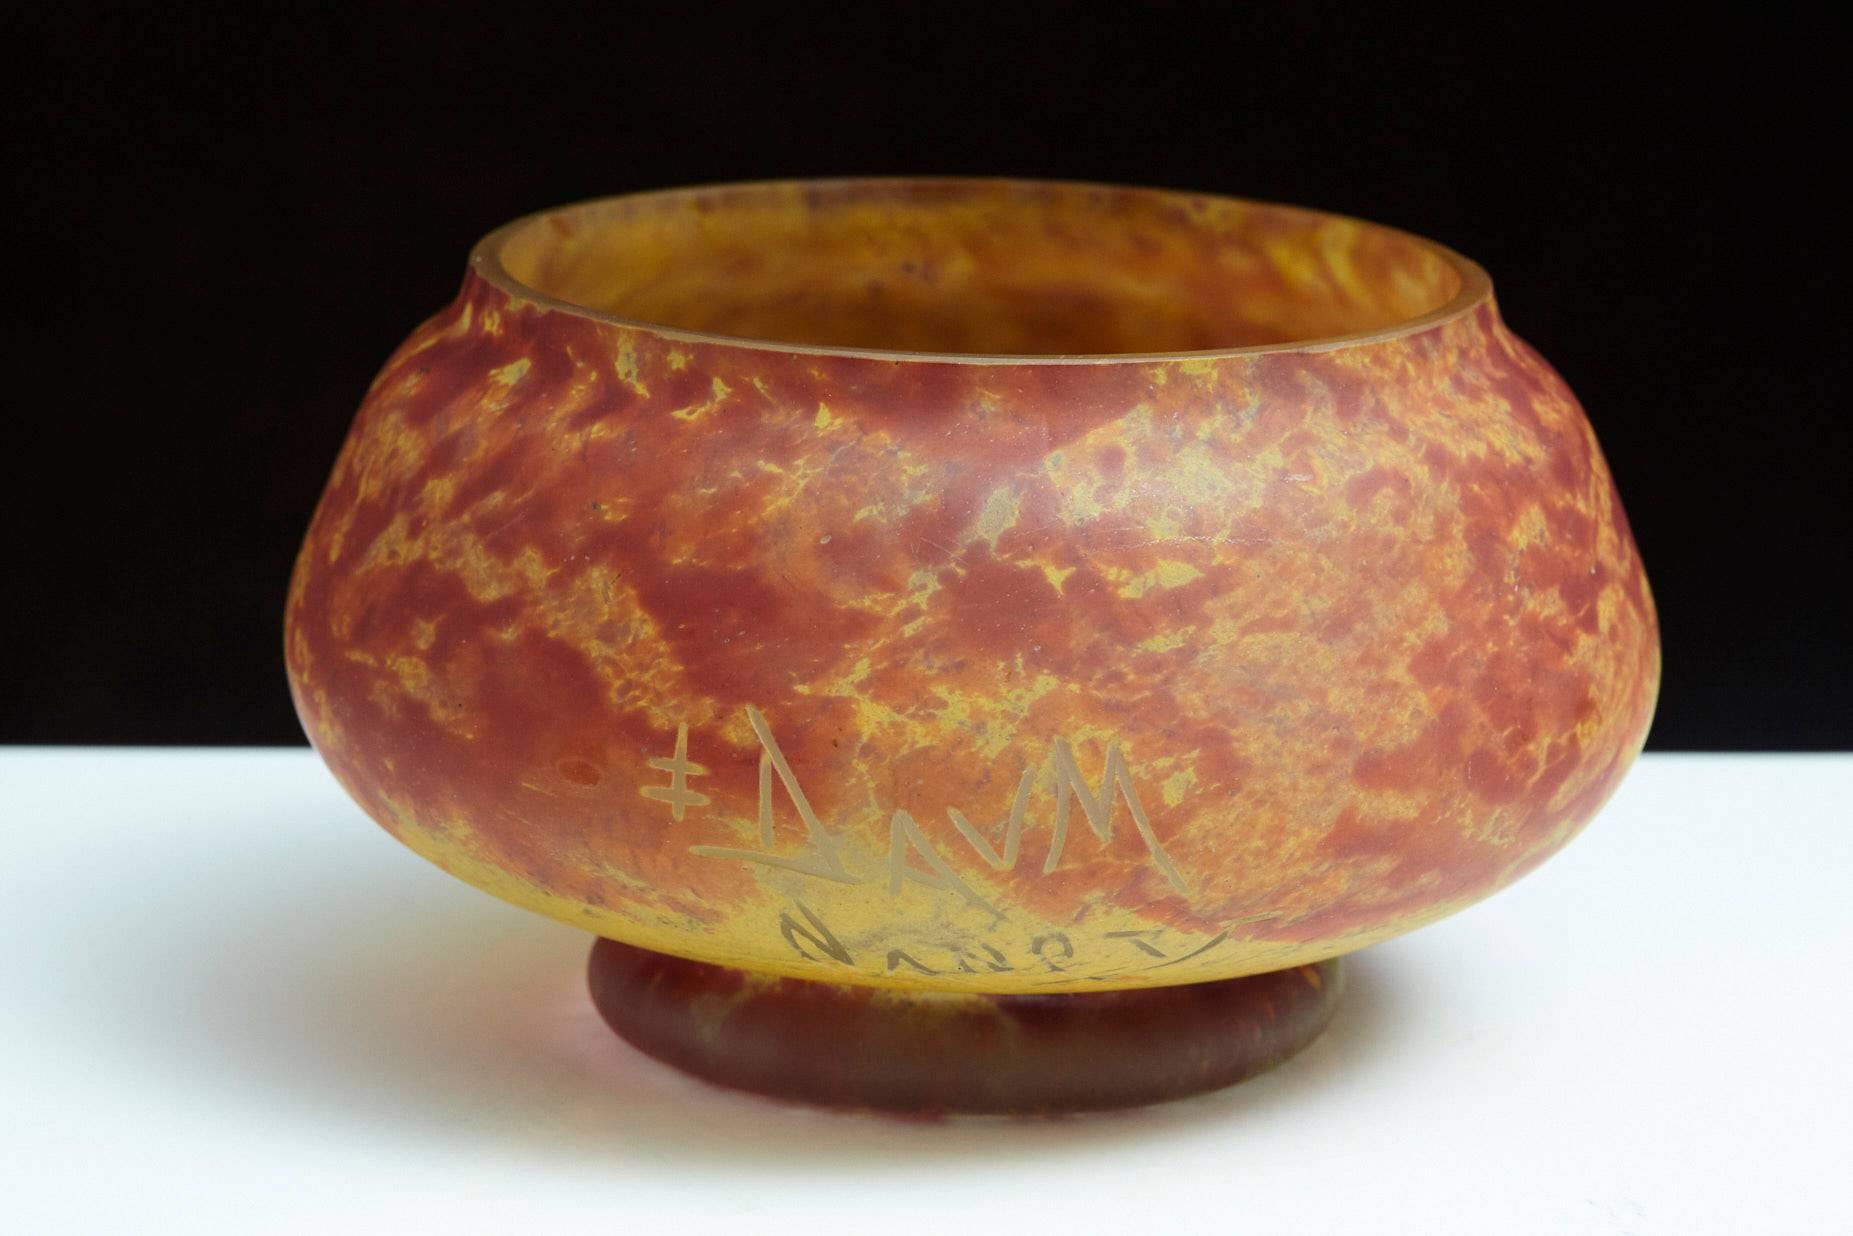 French Art Nouveau orange, yellow and red mottled glass / pâte de verre bowl, signed (etched into the glass) Daum Nancy and La Croix de Lorraine.
There is one minor flea bite to the edge, please refer to the photo, otherwise the bowl is in a very